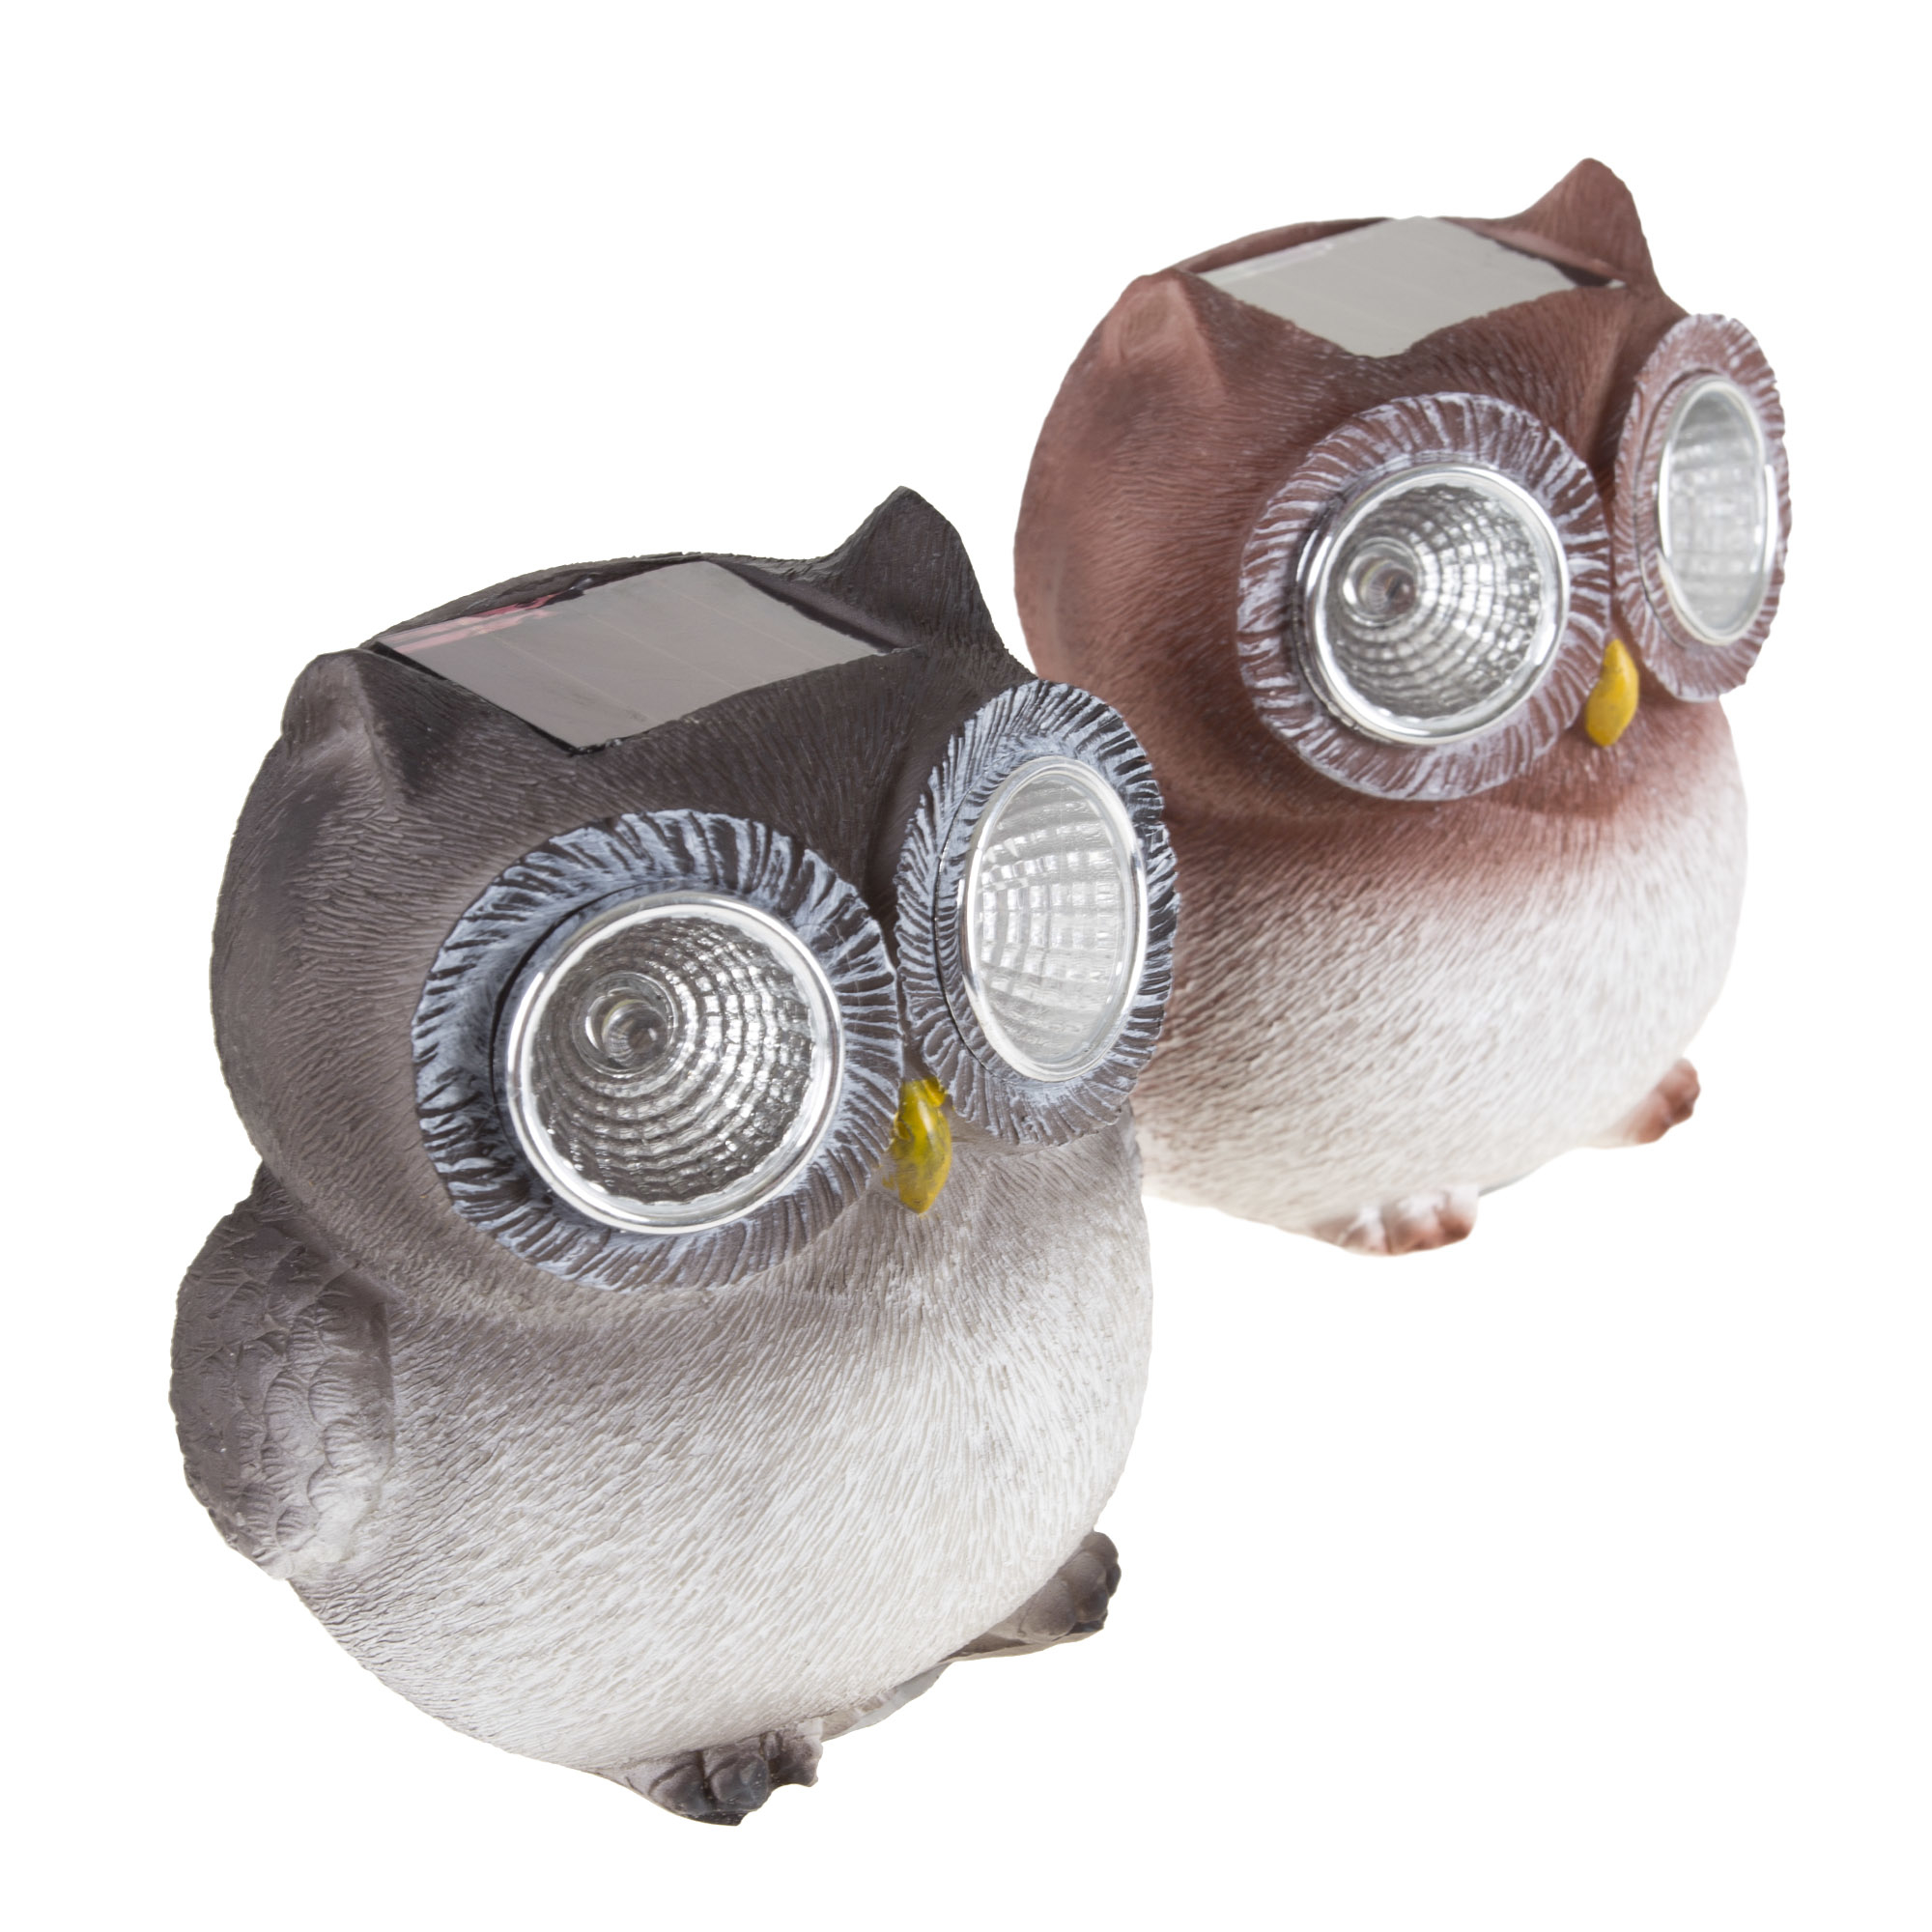 Set Of 2 Baby Owl Solar Lights For Garden, Yard Decor Flower Bed Window Sill 3.25 Inches High